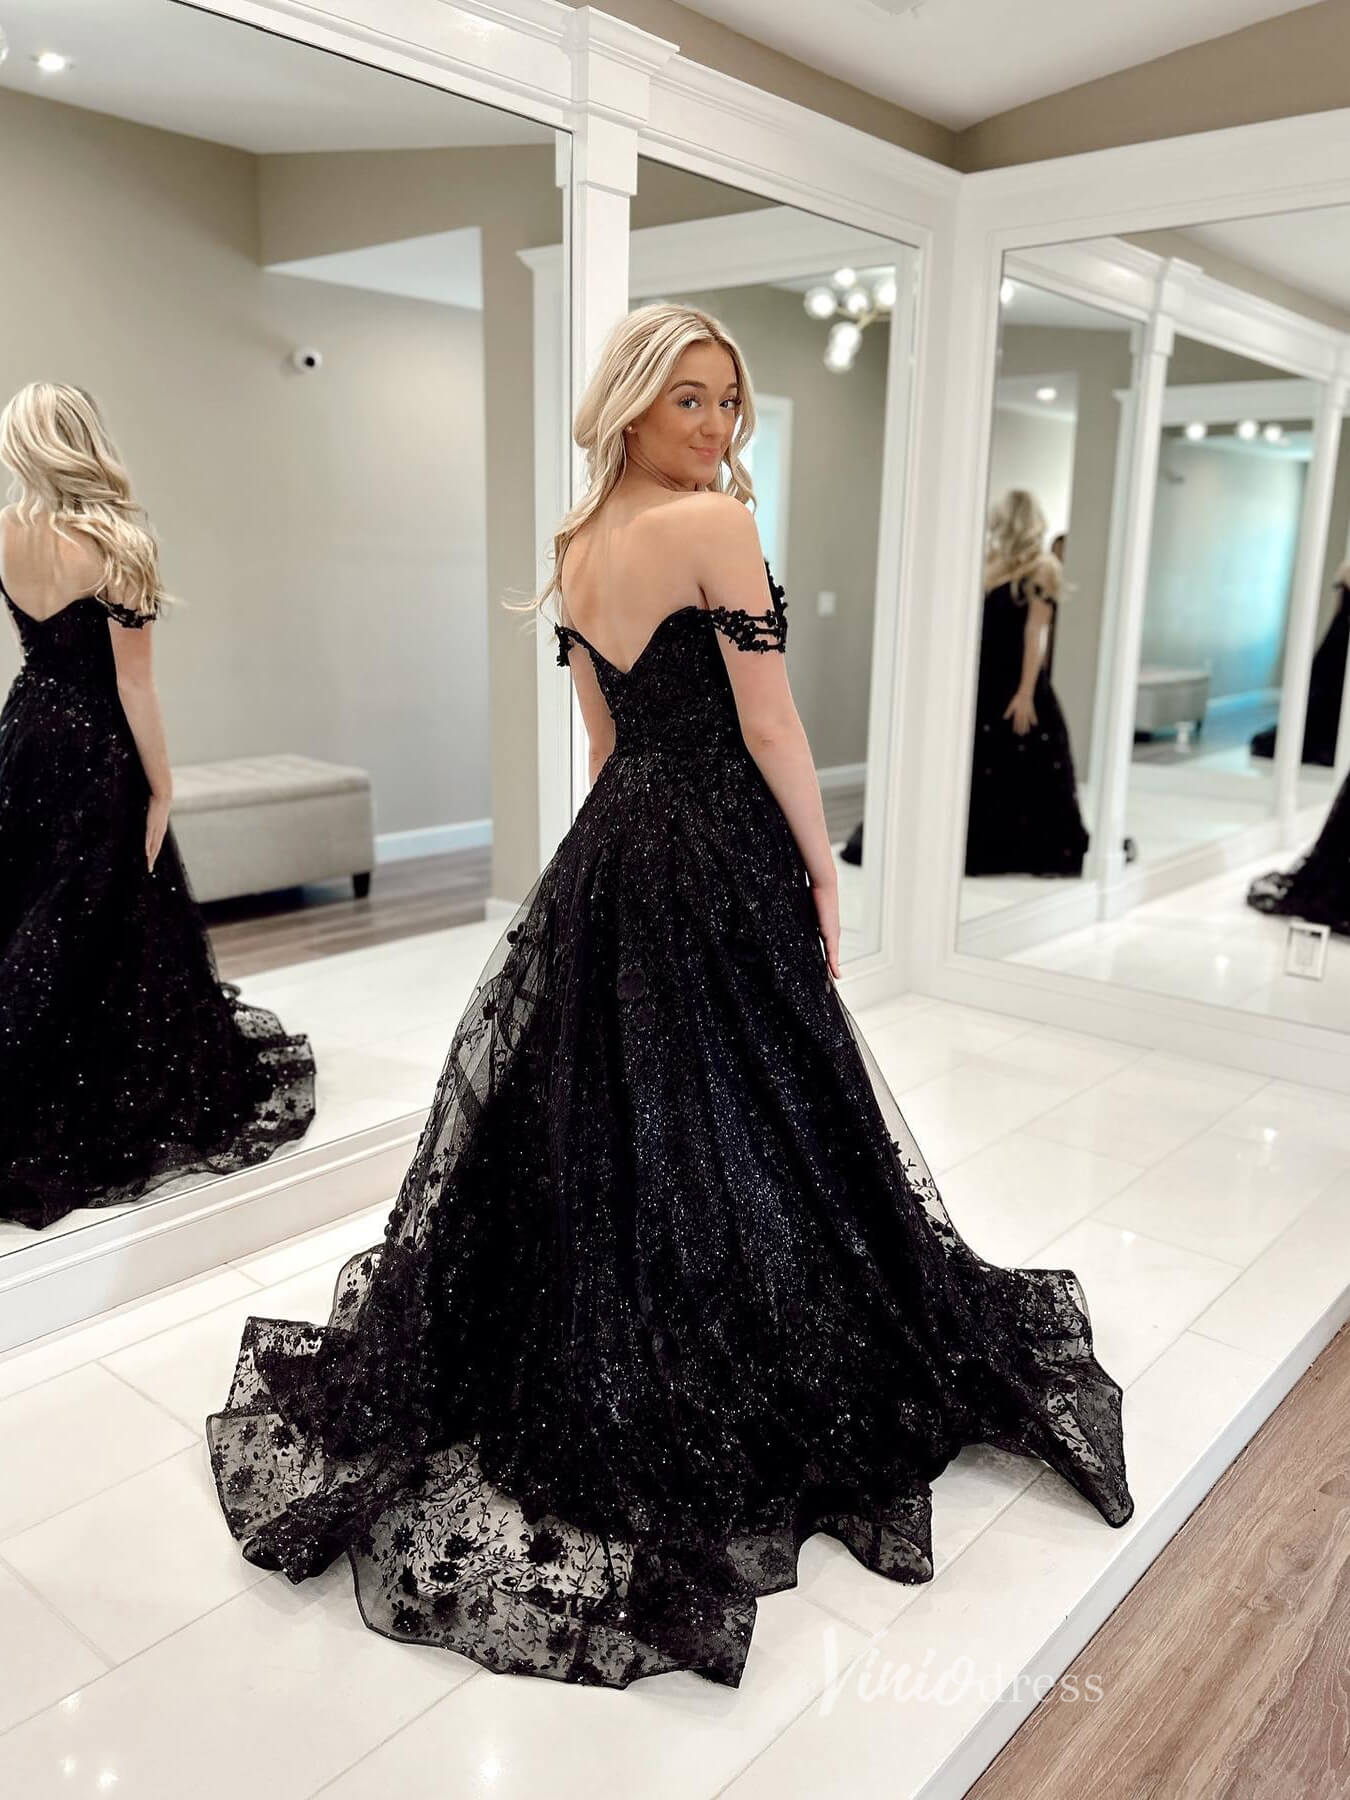 Black Sparkly Lace Prom Dresses Off the Shouder Formal Gown FD3972-prom dresses-Viniodress-Viniodress